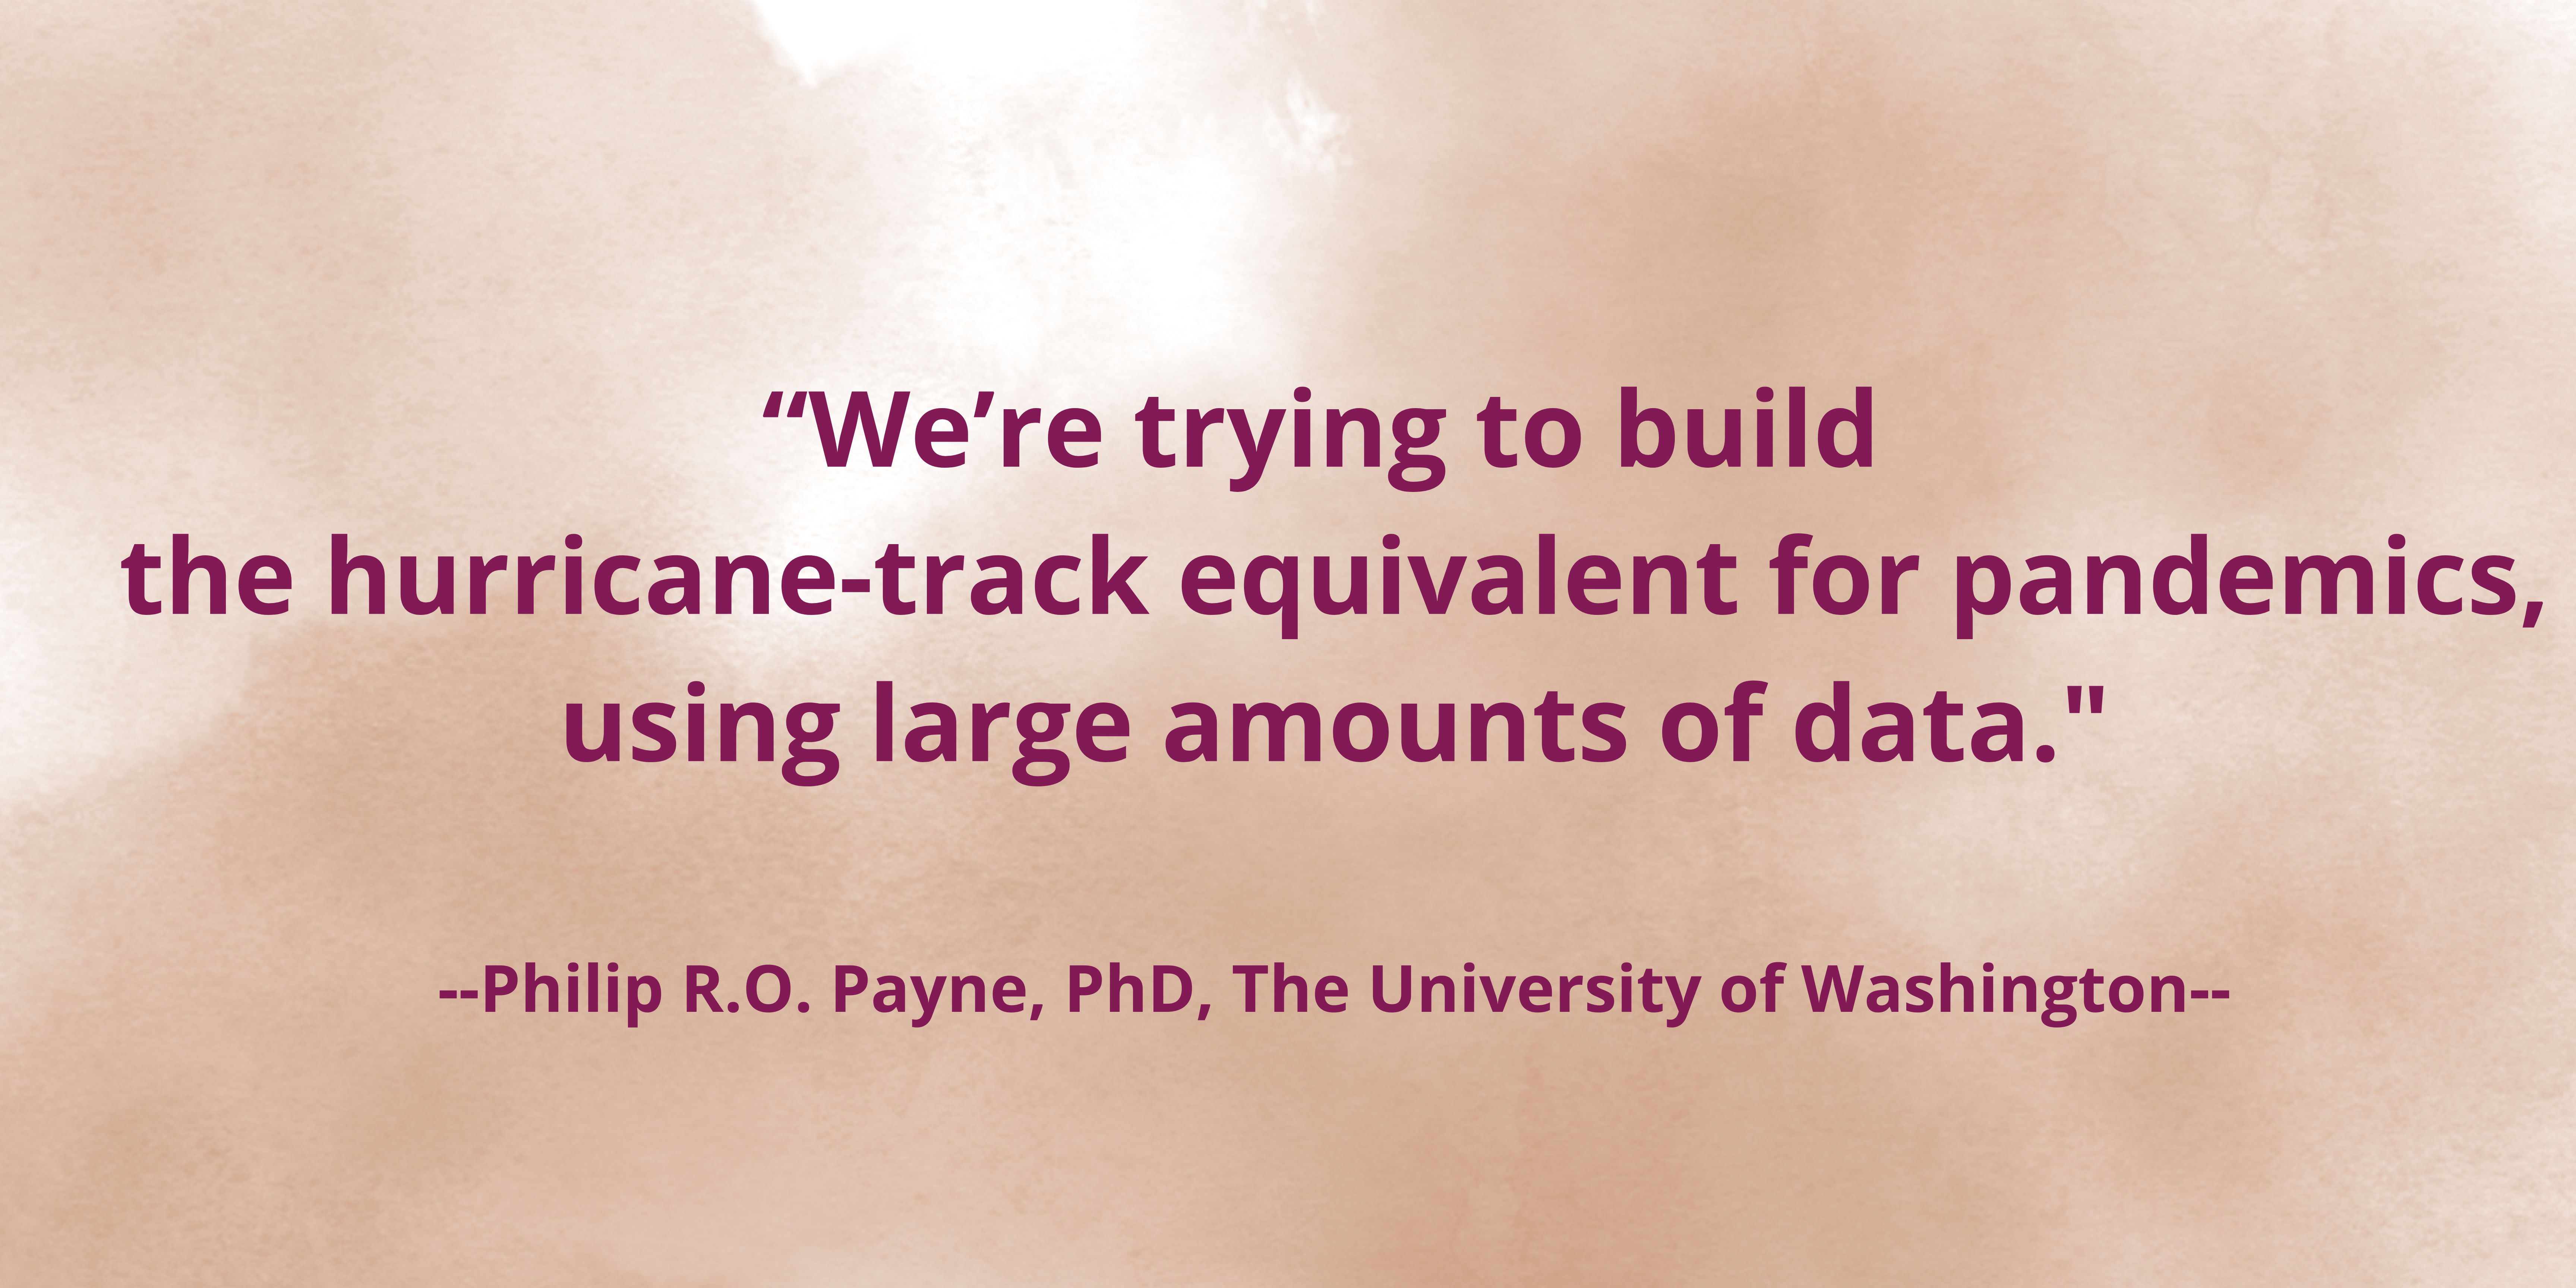 “We’re trying to build the hurricane-track equivalent for pandemics, using large amounts of data.